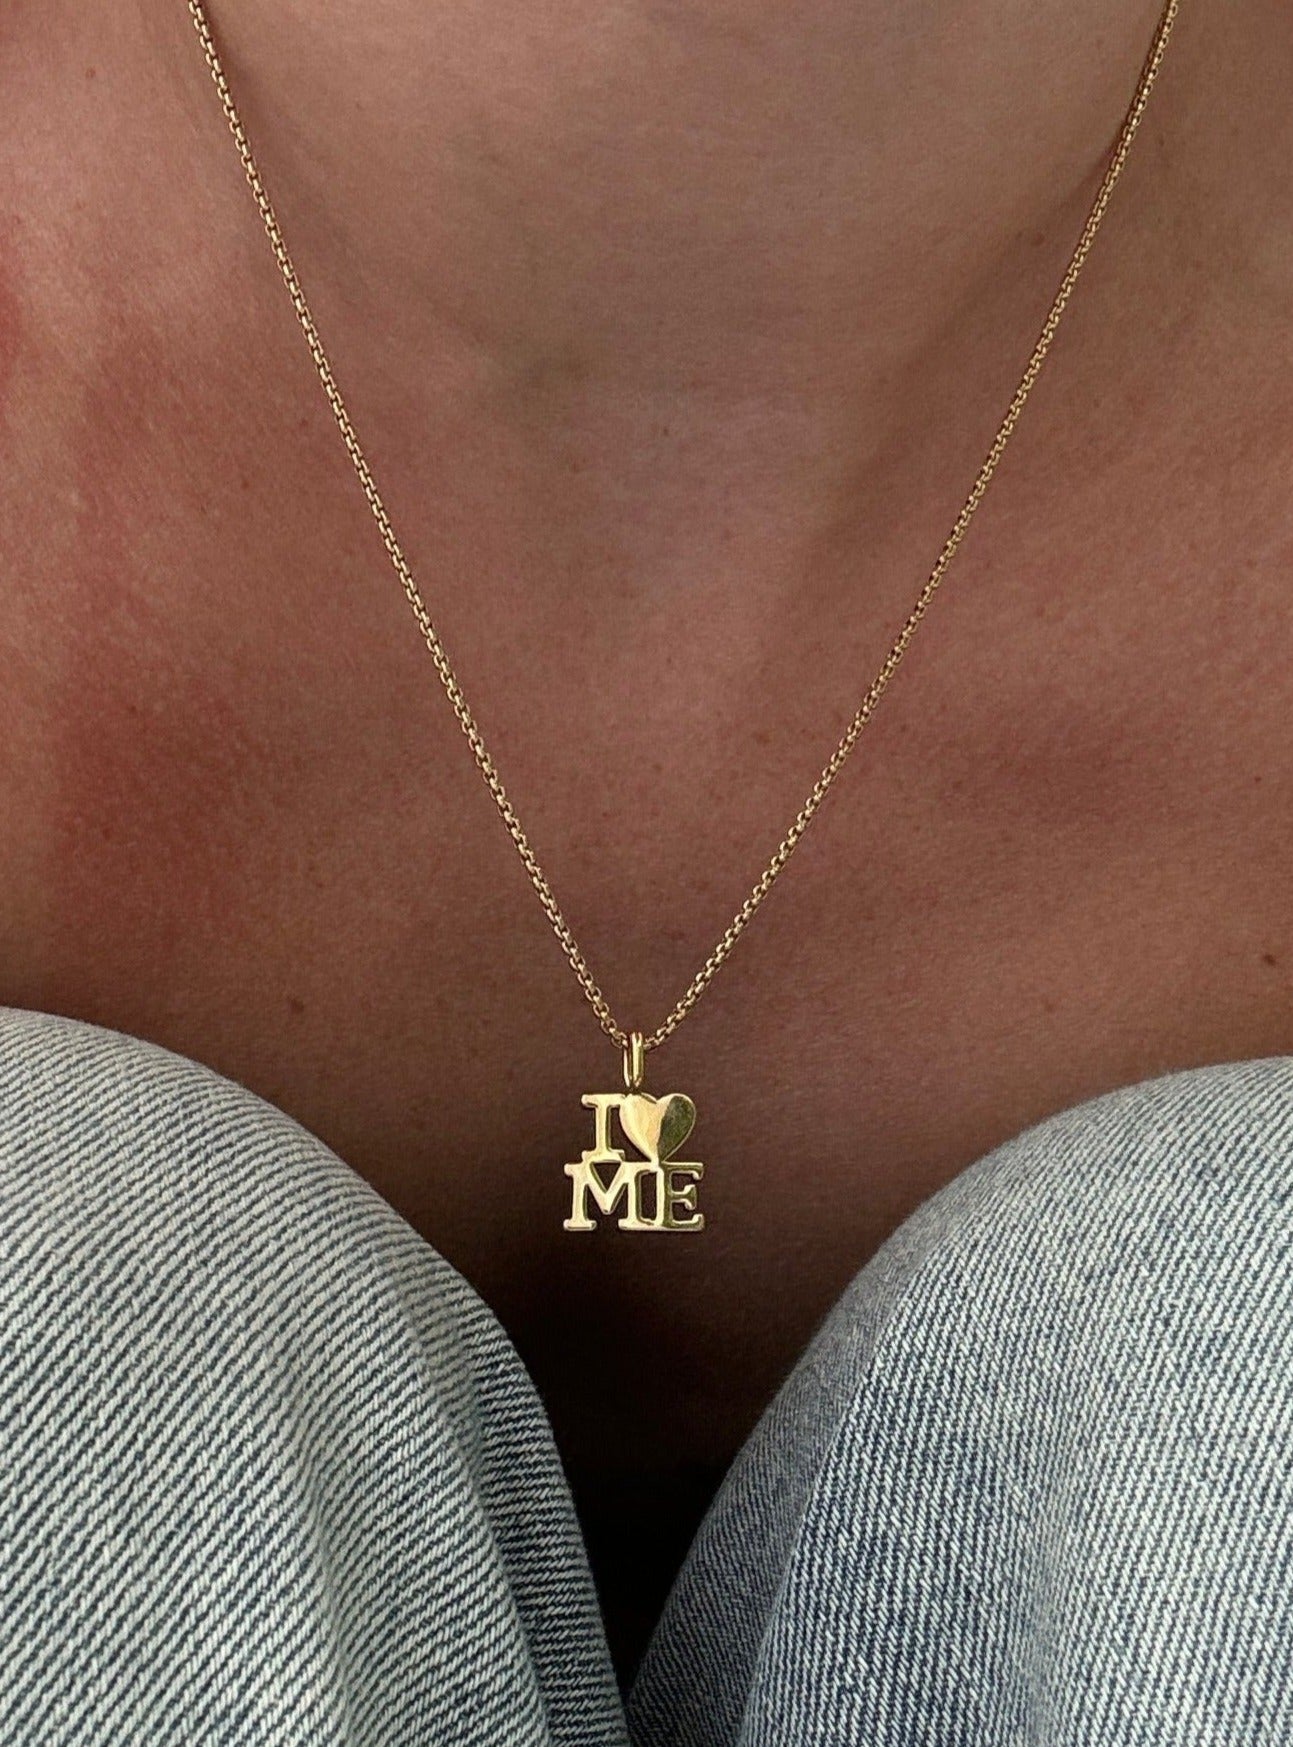 Me Necklace Gold